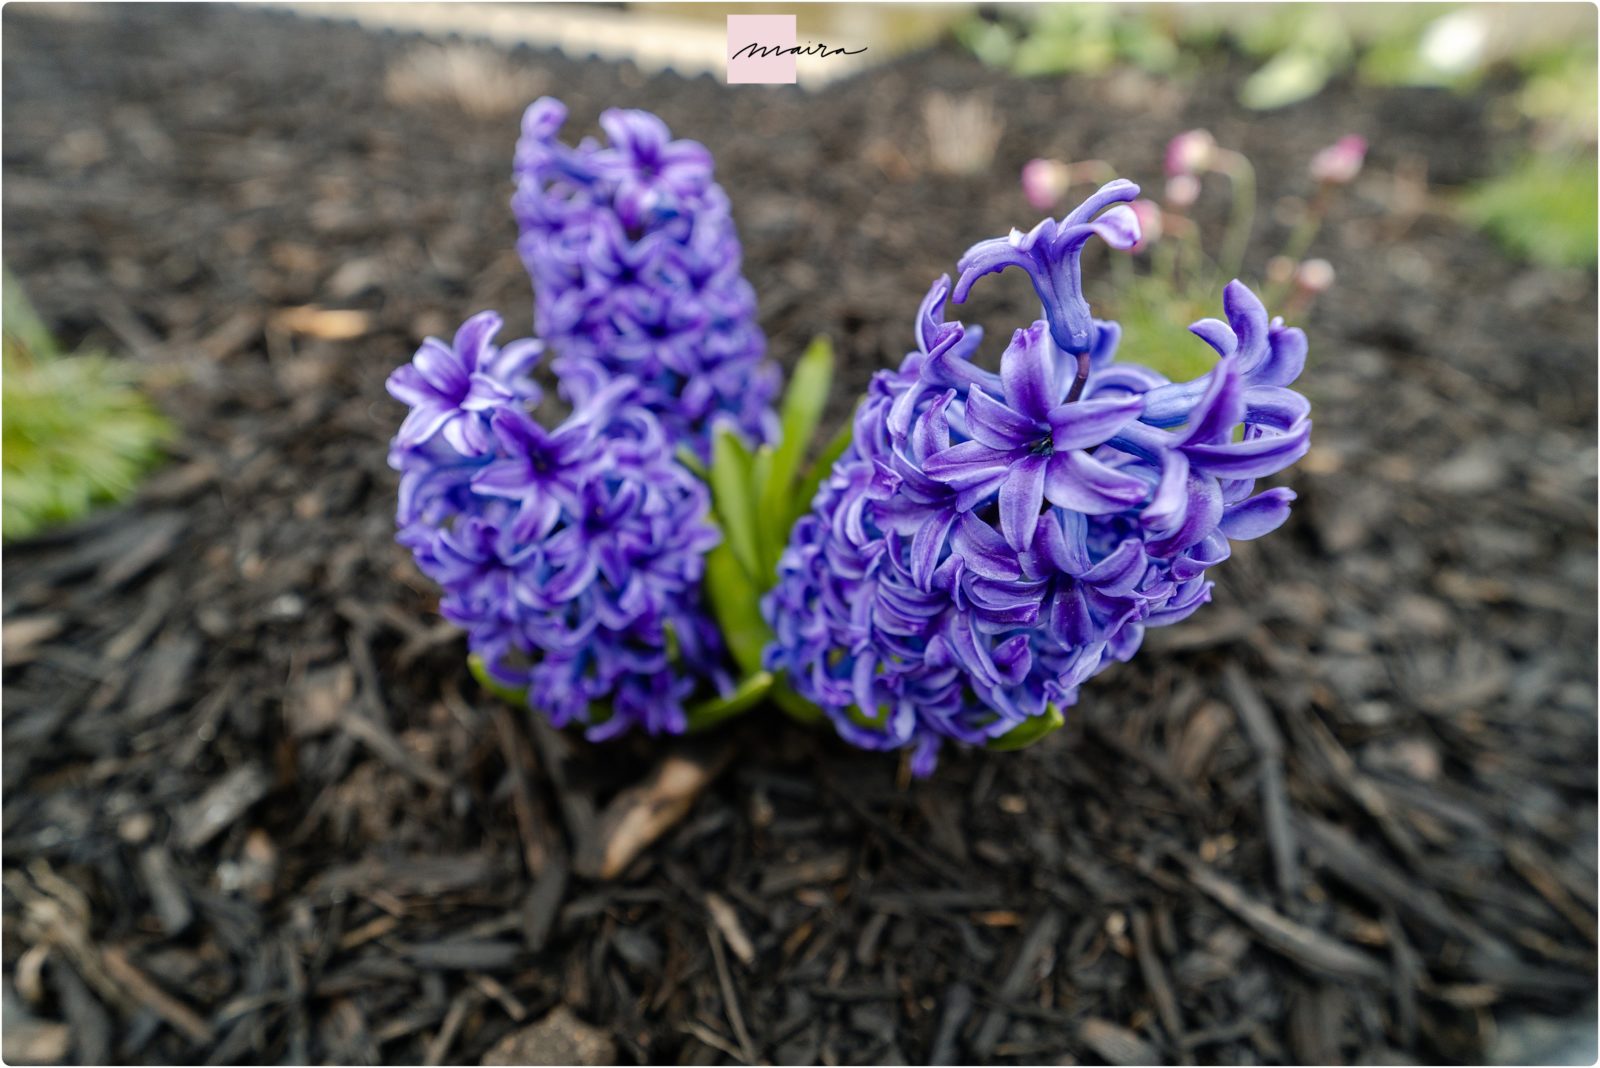 Perennials, Hyacinth, Daffodil, Dormant plants, before and after growth photos, Spring flowers, annabelle hydrangeas, Sage, Lavender, Bloodstone Thrift, bushes